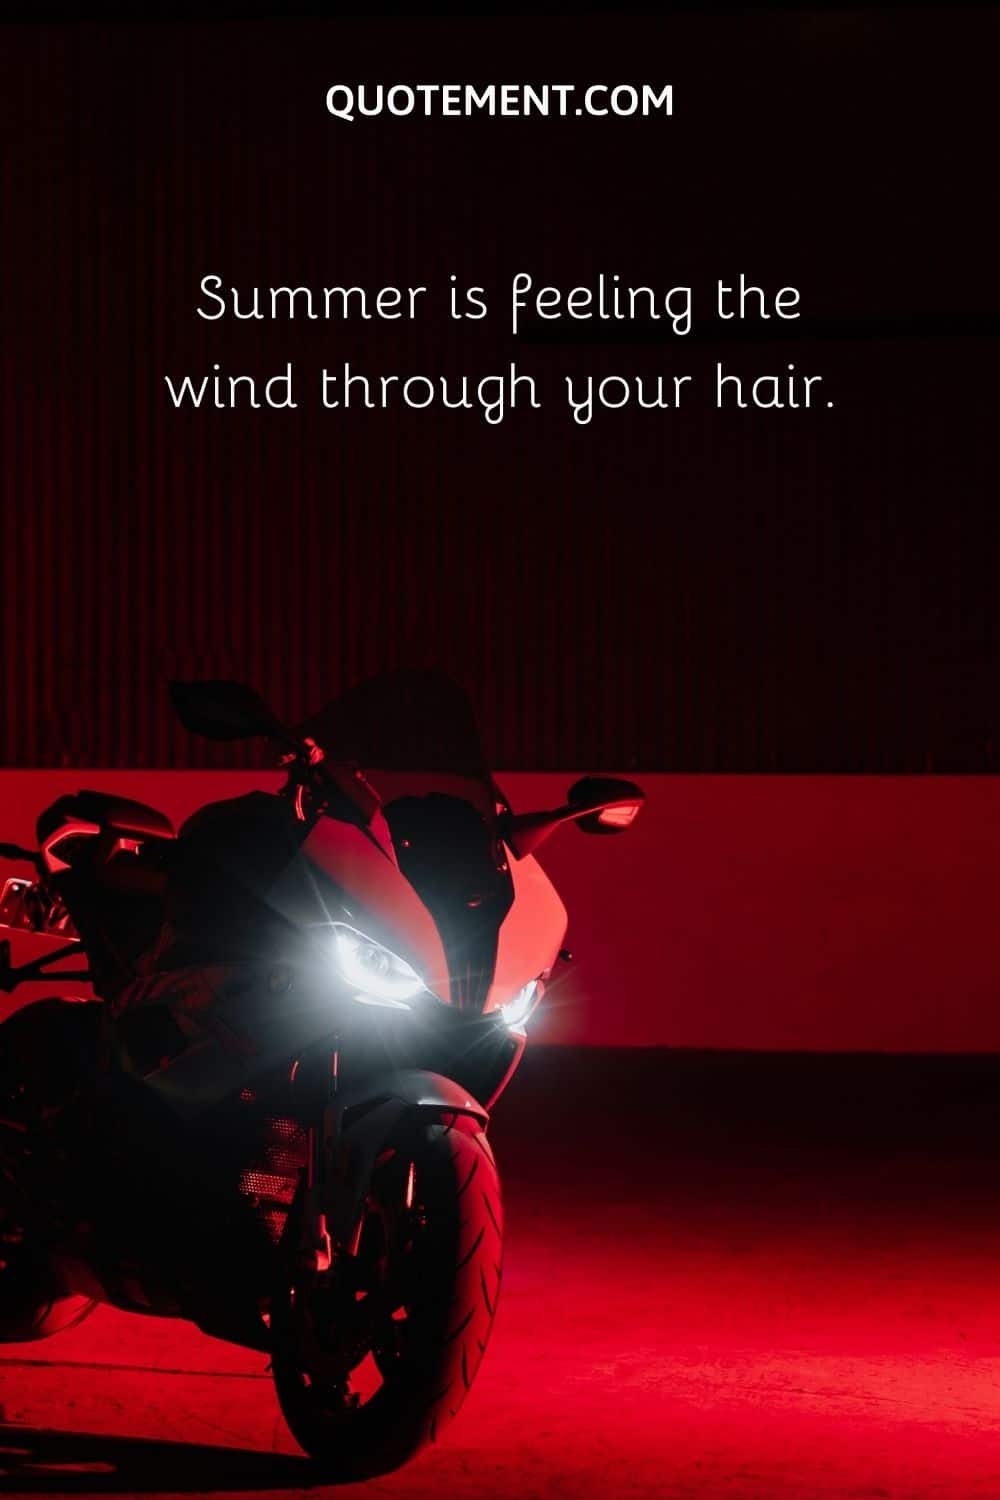 Summer is feeling the wind through your hair.